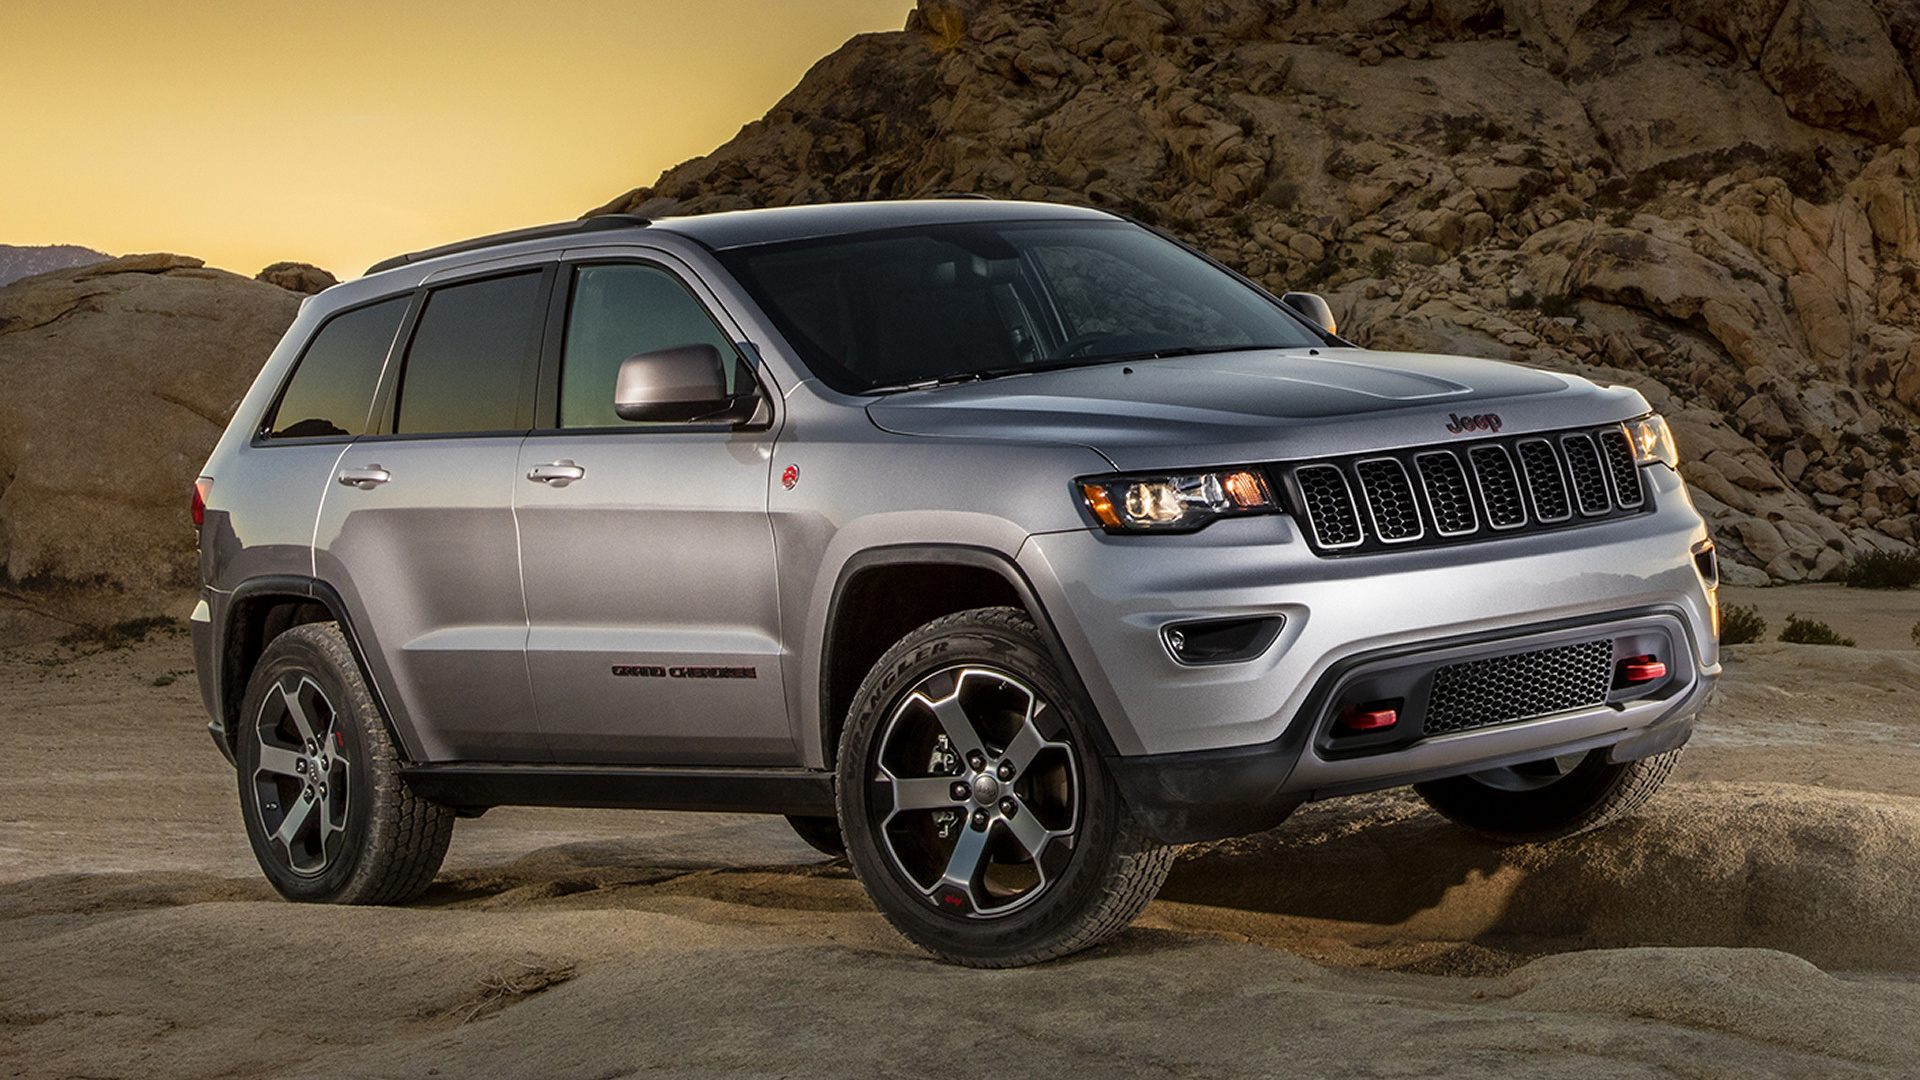 Jeep Grand Cherokee Wallpapers Images Photos Pictures Backgrounds 2005 Jeep Grand Cherokee 5.7 Hemi Performance Upgrades